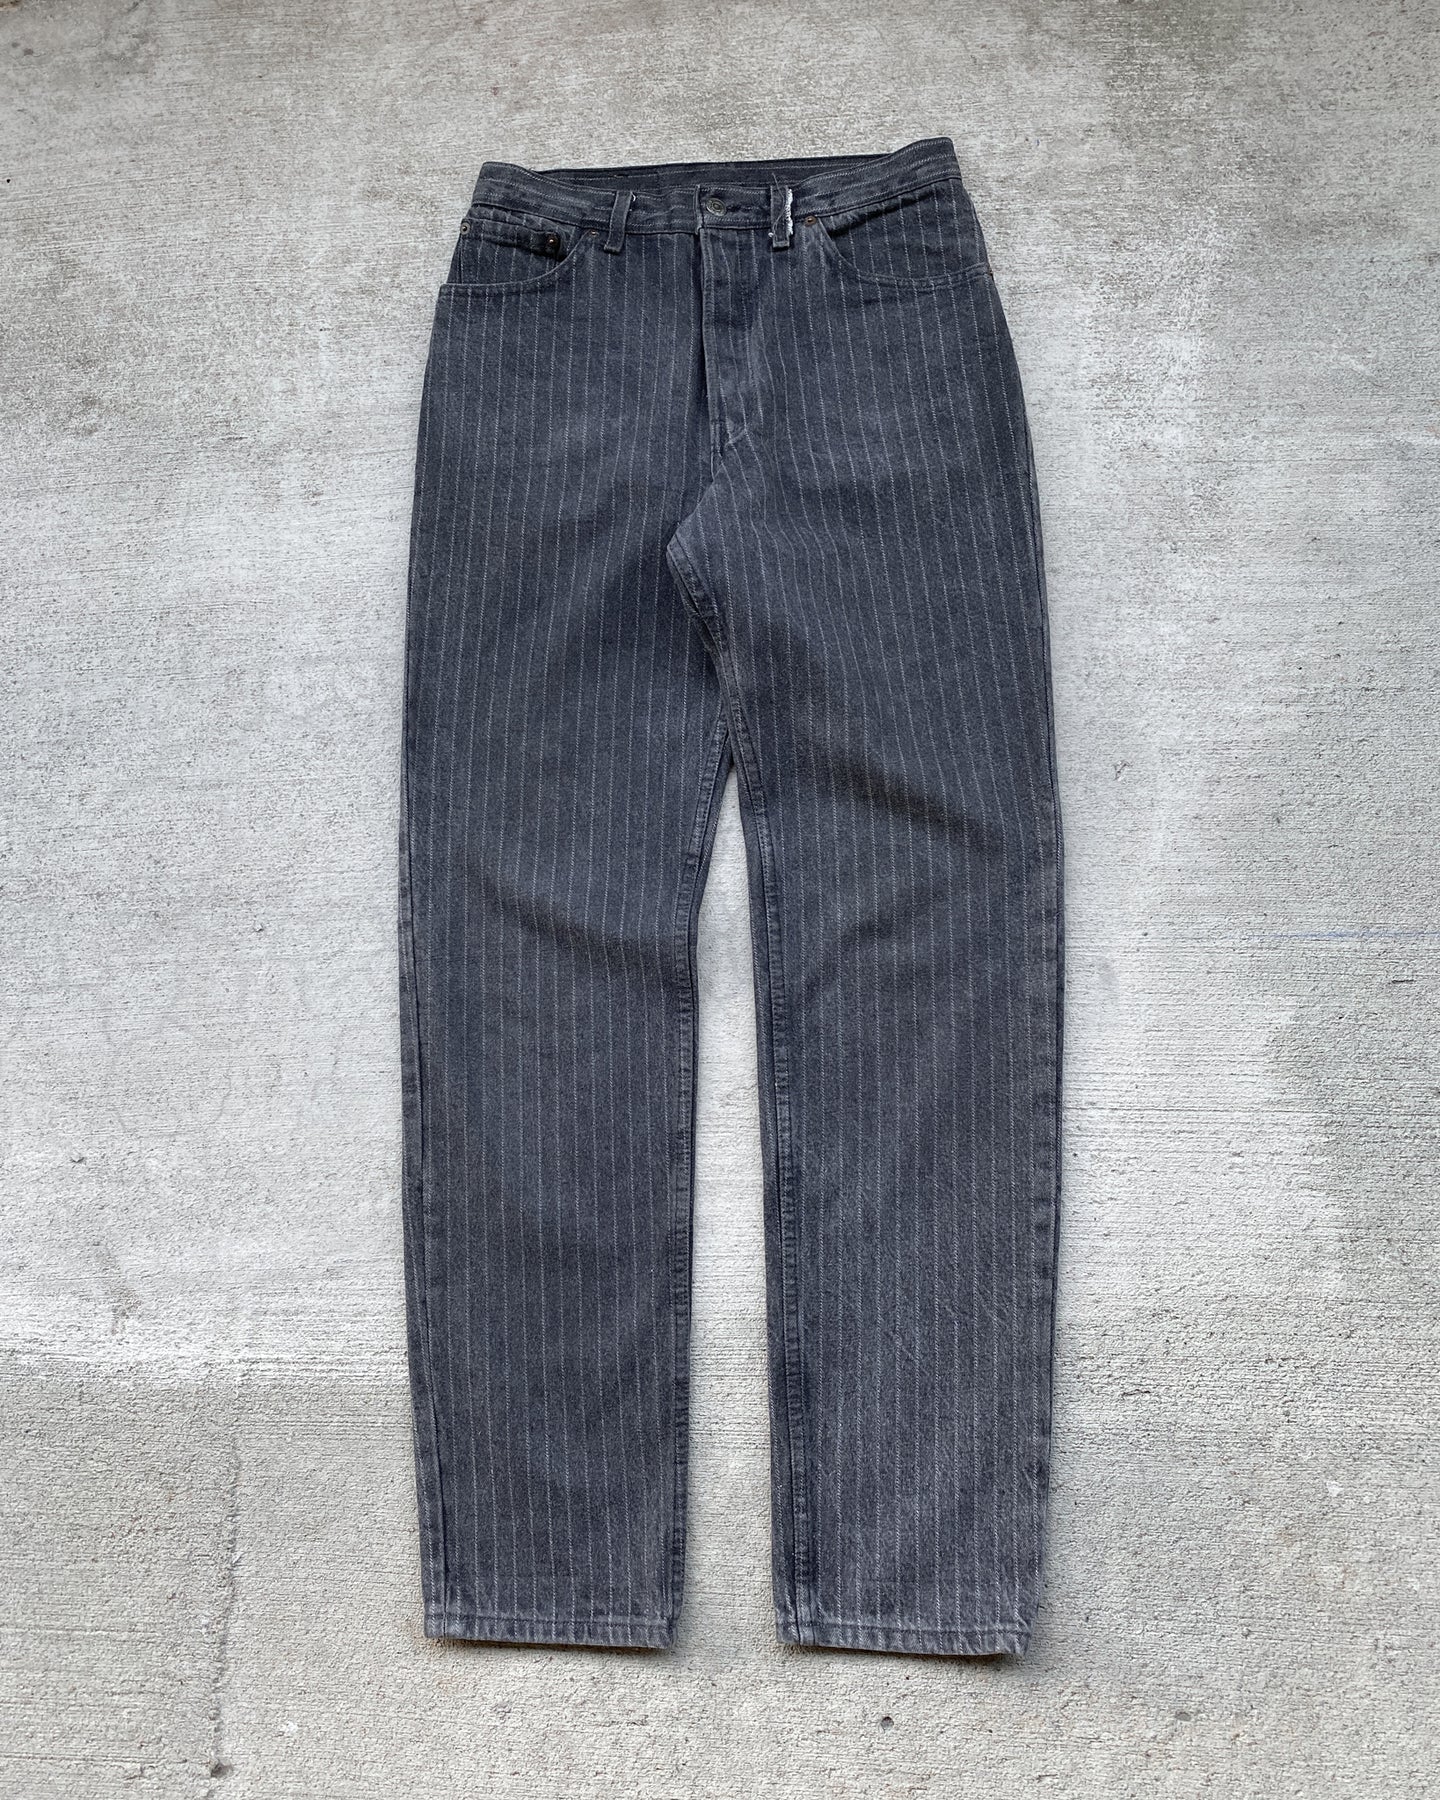 1990s Levi's Charcoal Grey Pinstriped 501 - Size 30 x 33